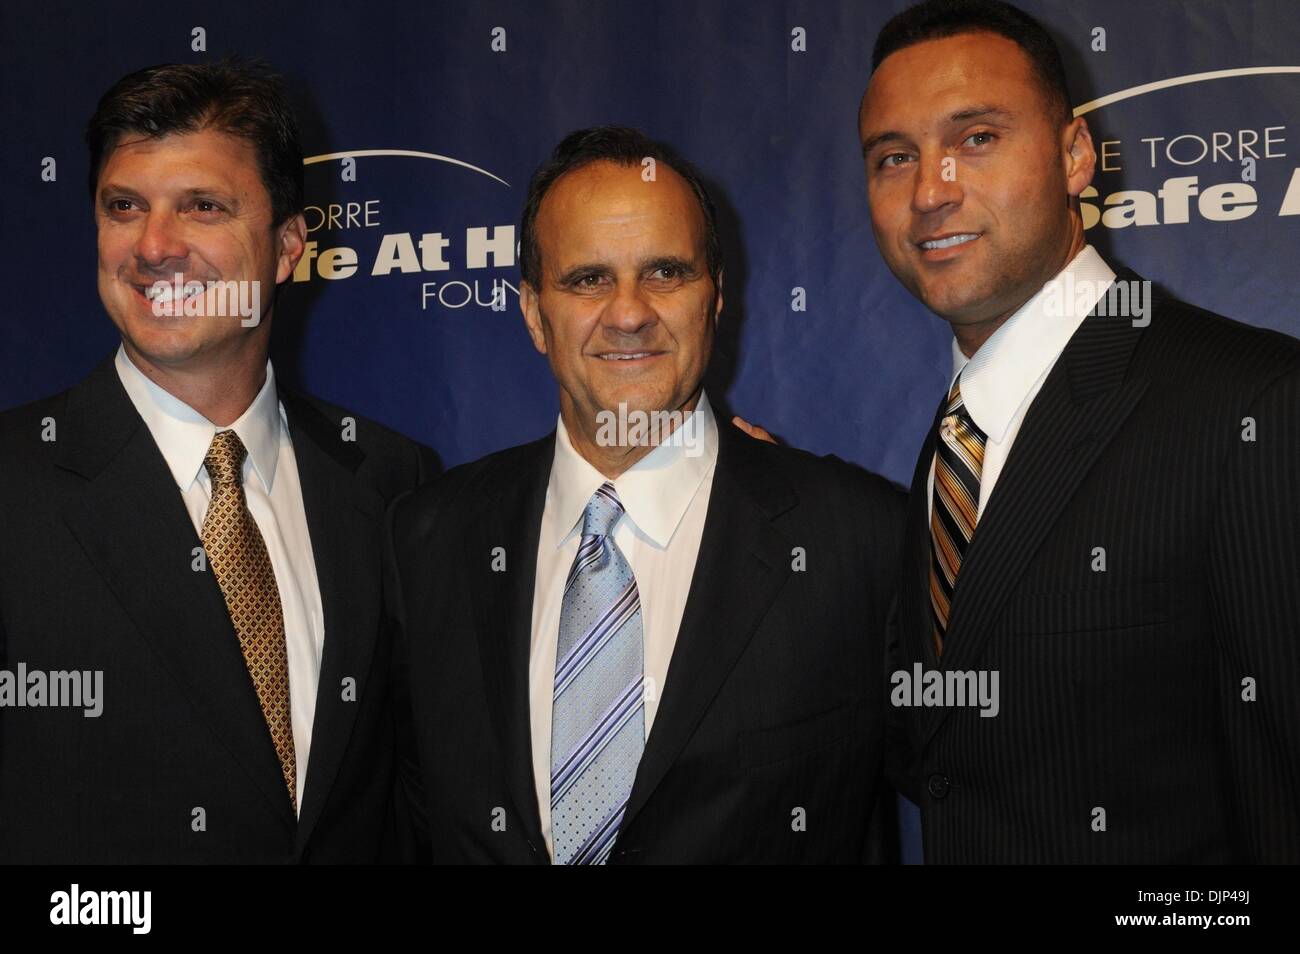 Nov 07, 2008 - Manhattan, New York, USA - TINO MARTINEZ, JOE TORRE and DEREK JETER.  Joe and Ali Torre. Joe Torre hosts 'Safe At Home Foundation' Gala at Pier 60, Chelsea Piers.  (Credit Image: Â© Bryan Smith/ZUMA Press) RESTRICTIONS:  * New York City Newspapers Rights OUT * Stock Photo